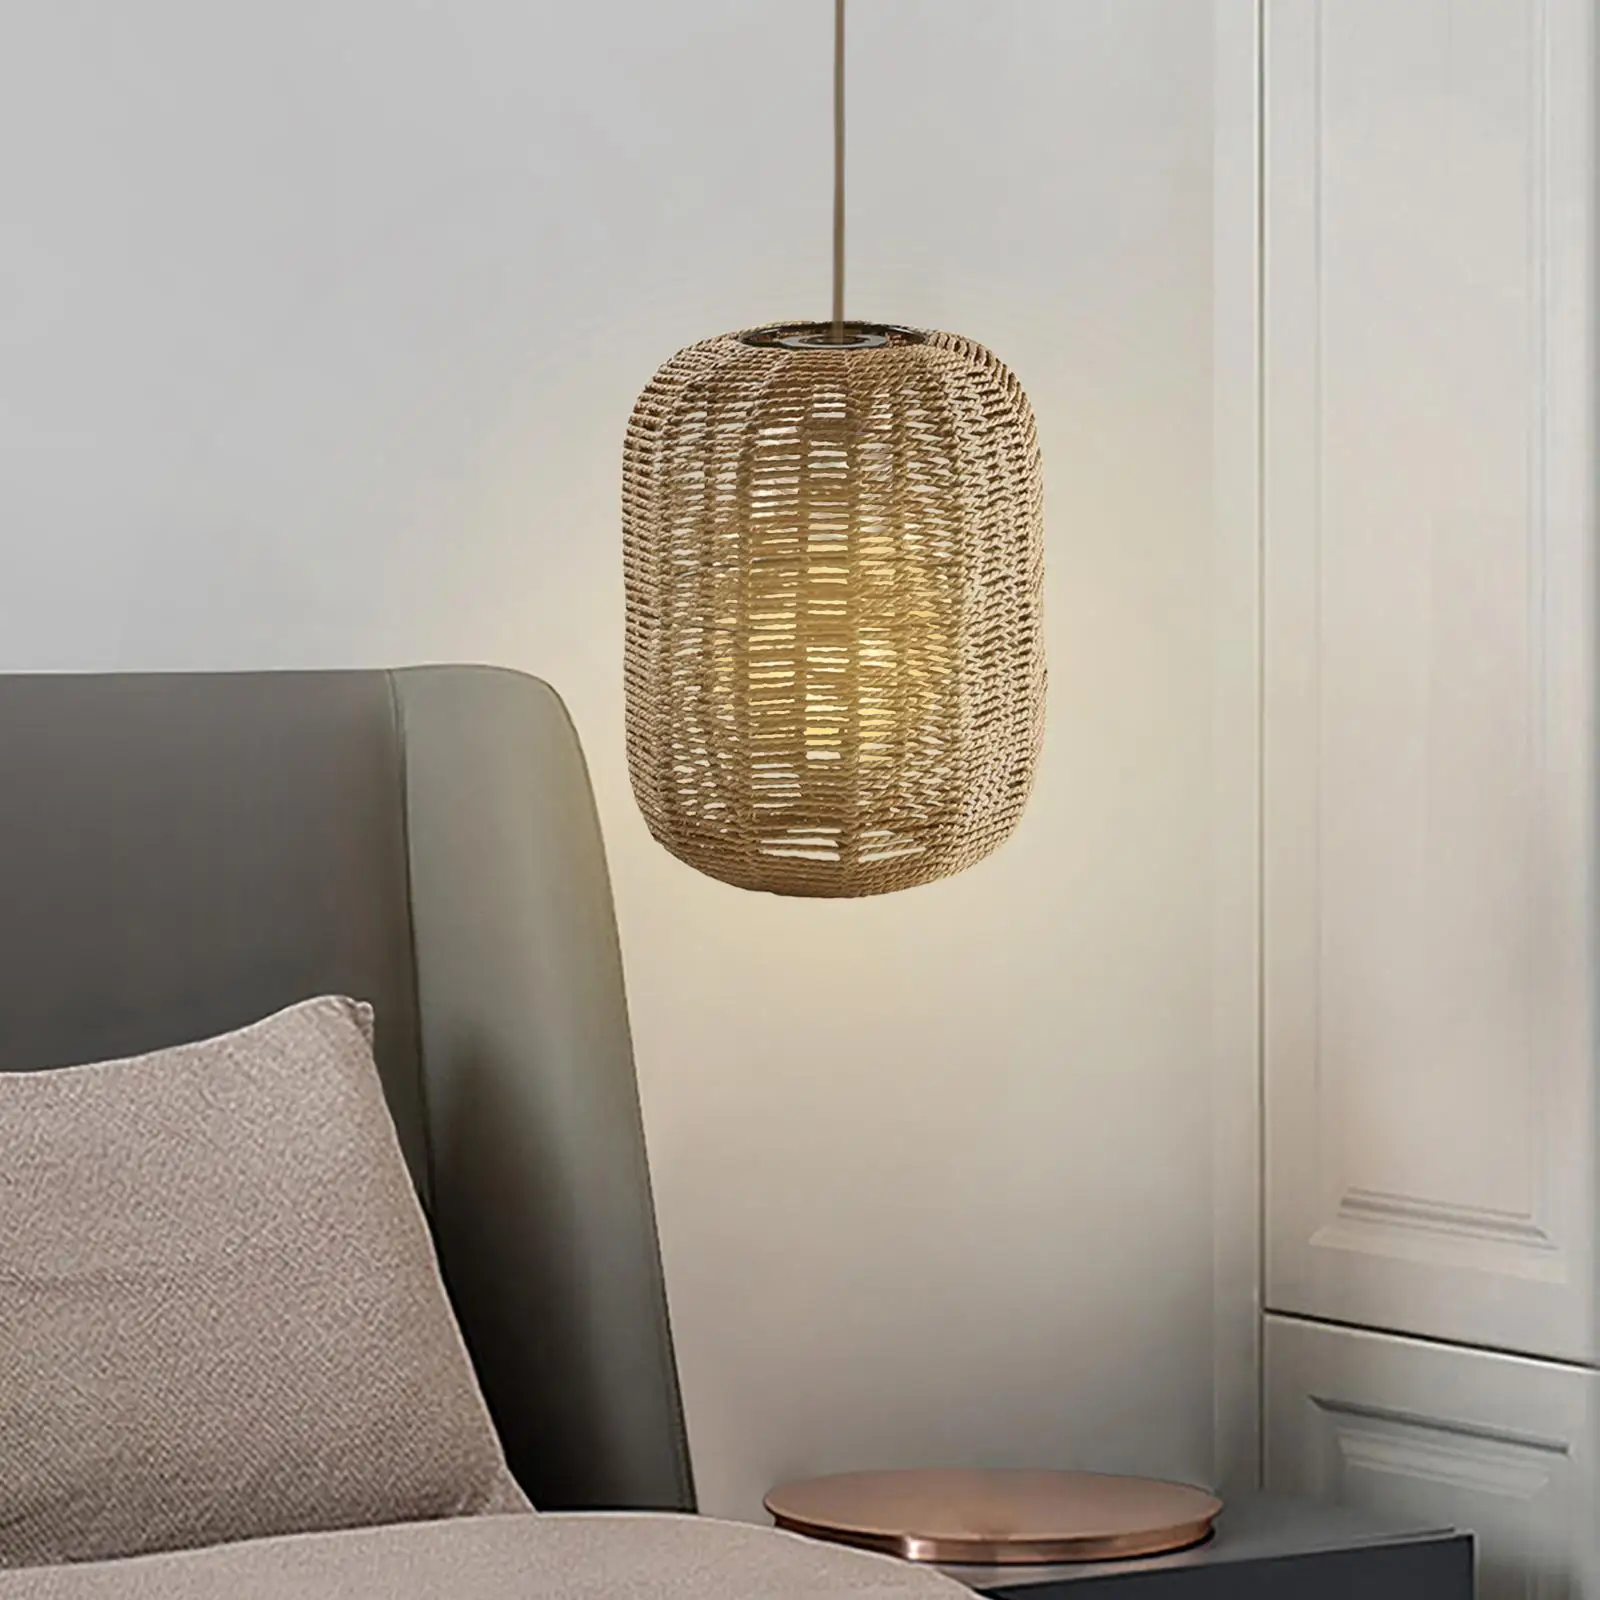 Pendant Lamp Shade Boho Woven Paper Rope Hanging Light Fixture Chandelier Cover for Kitchen Island Hotel Dining Room Living Room